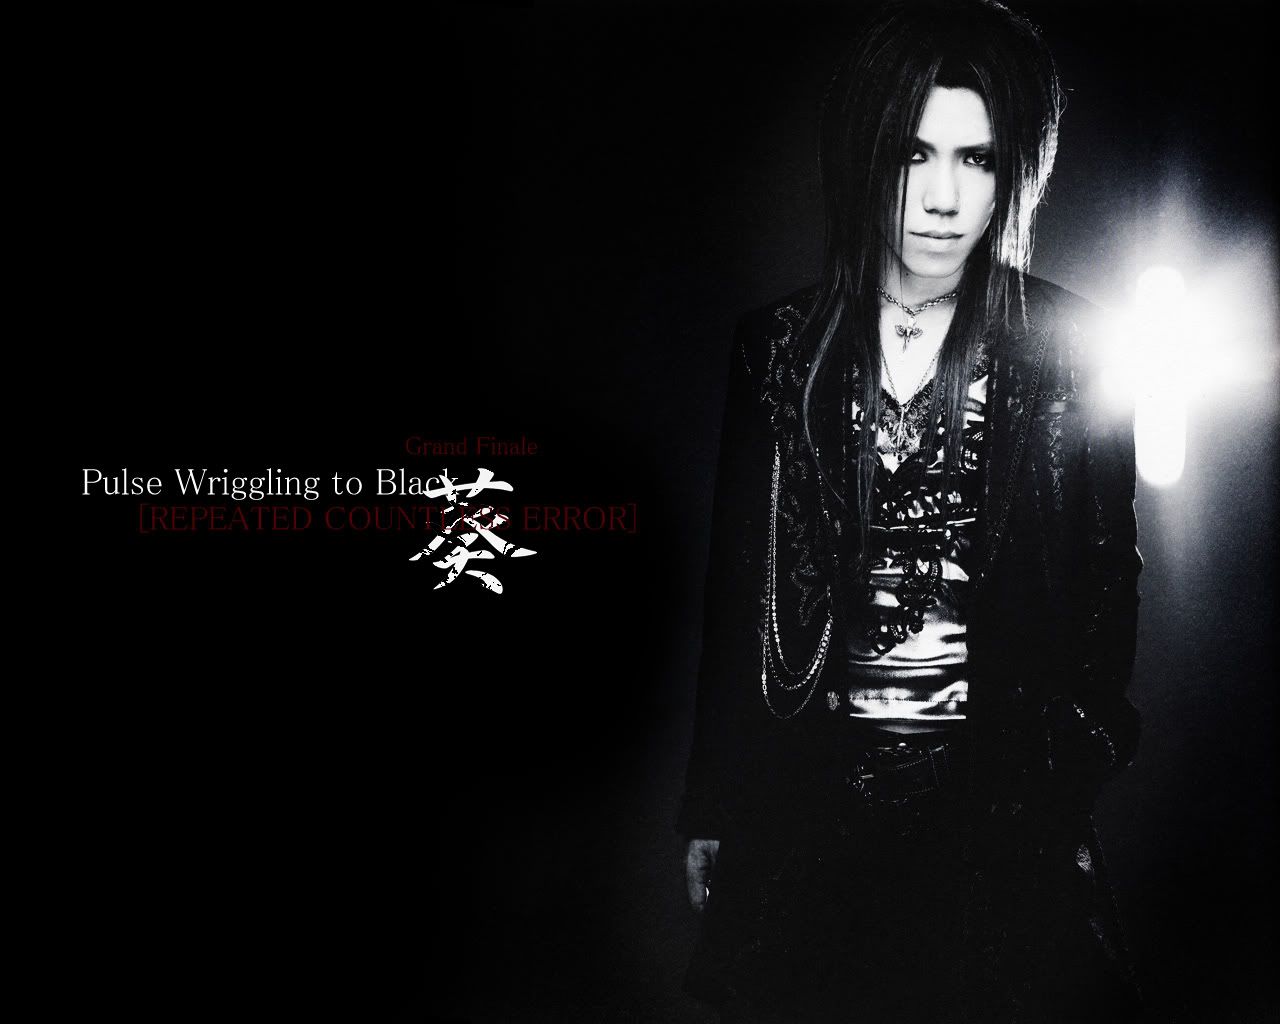 Tags:gazette, icons, wallpapers